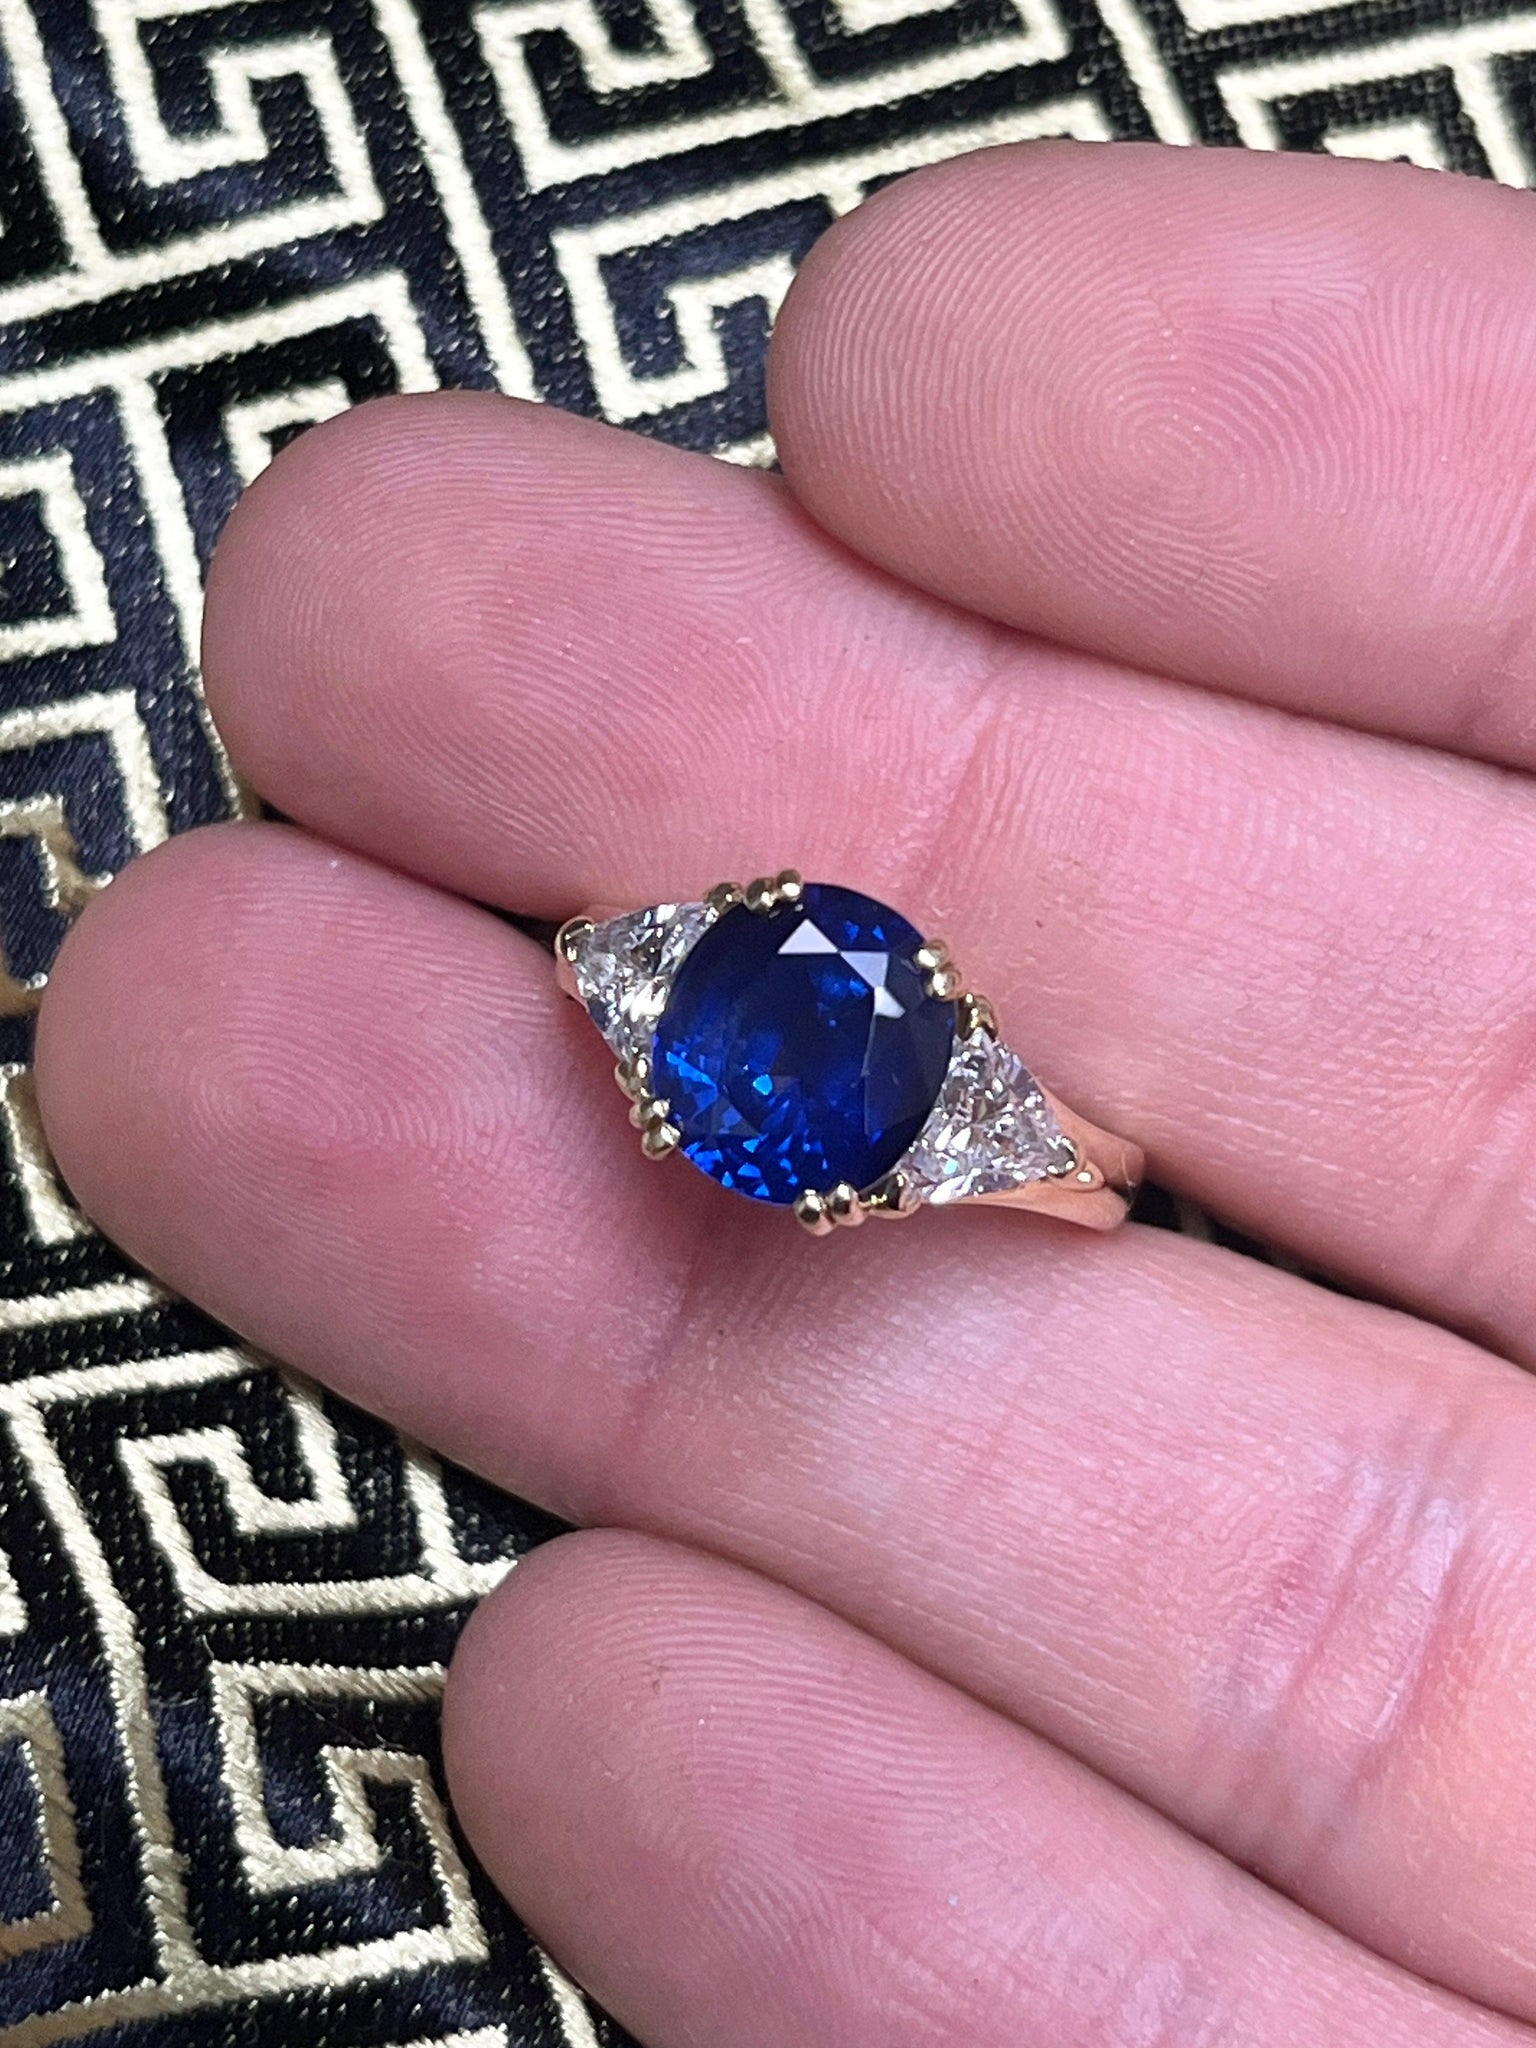 GIA Certified Oval Blue Sapphire and Trillion Diamond 3 Stone Ring in 18K-Rings-ASSAY